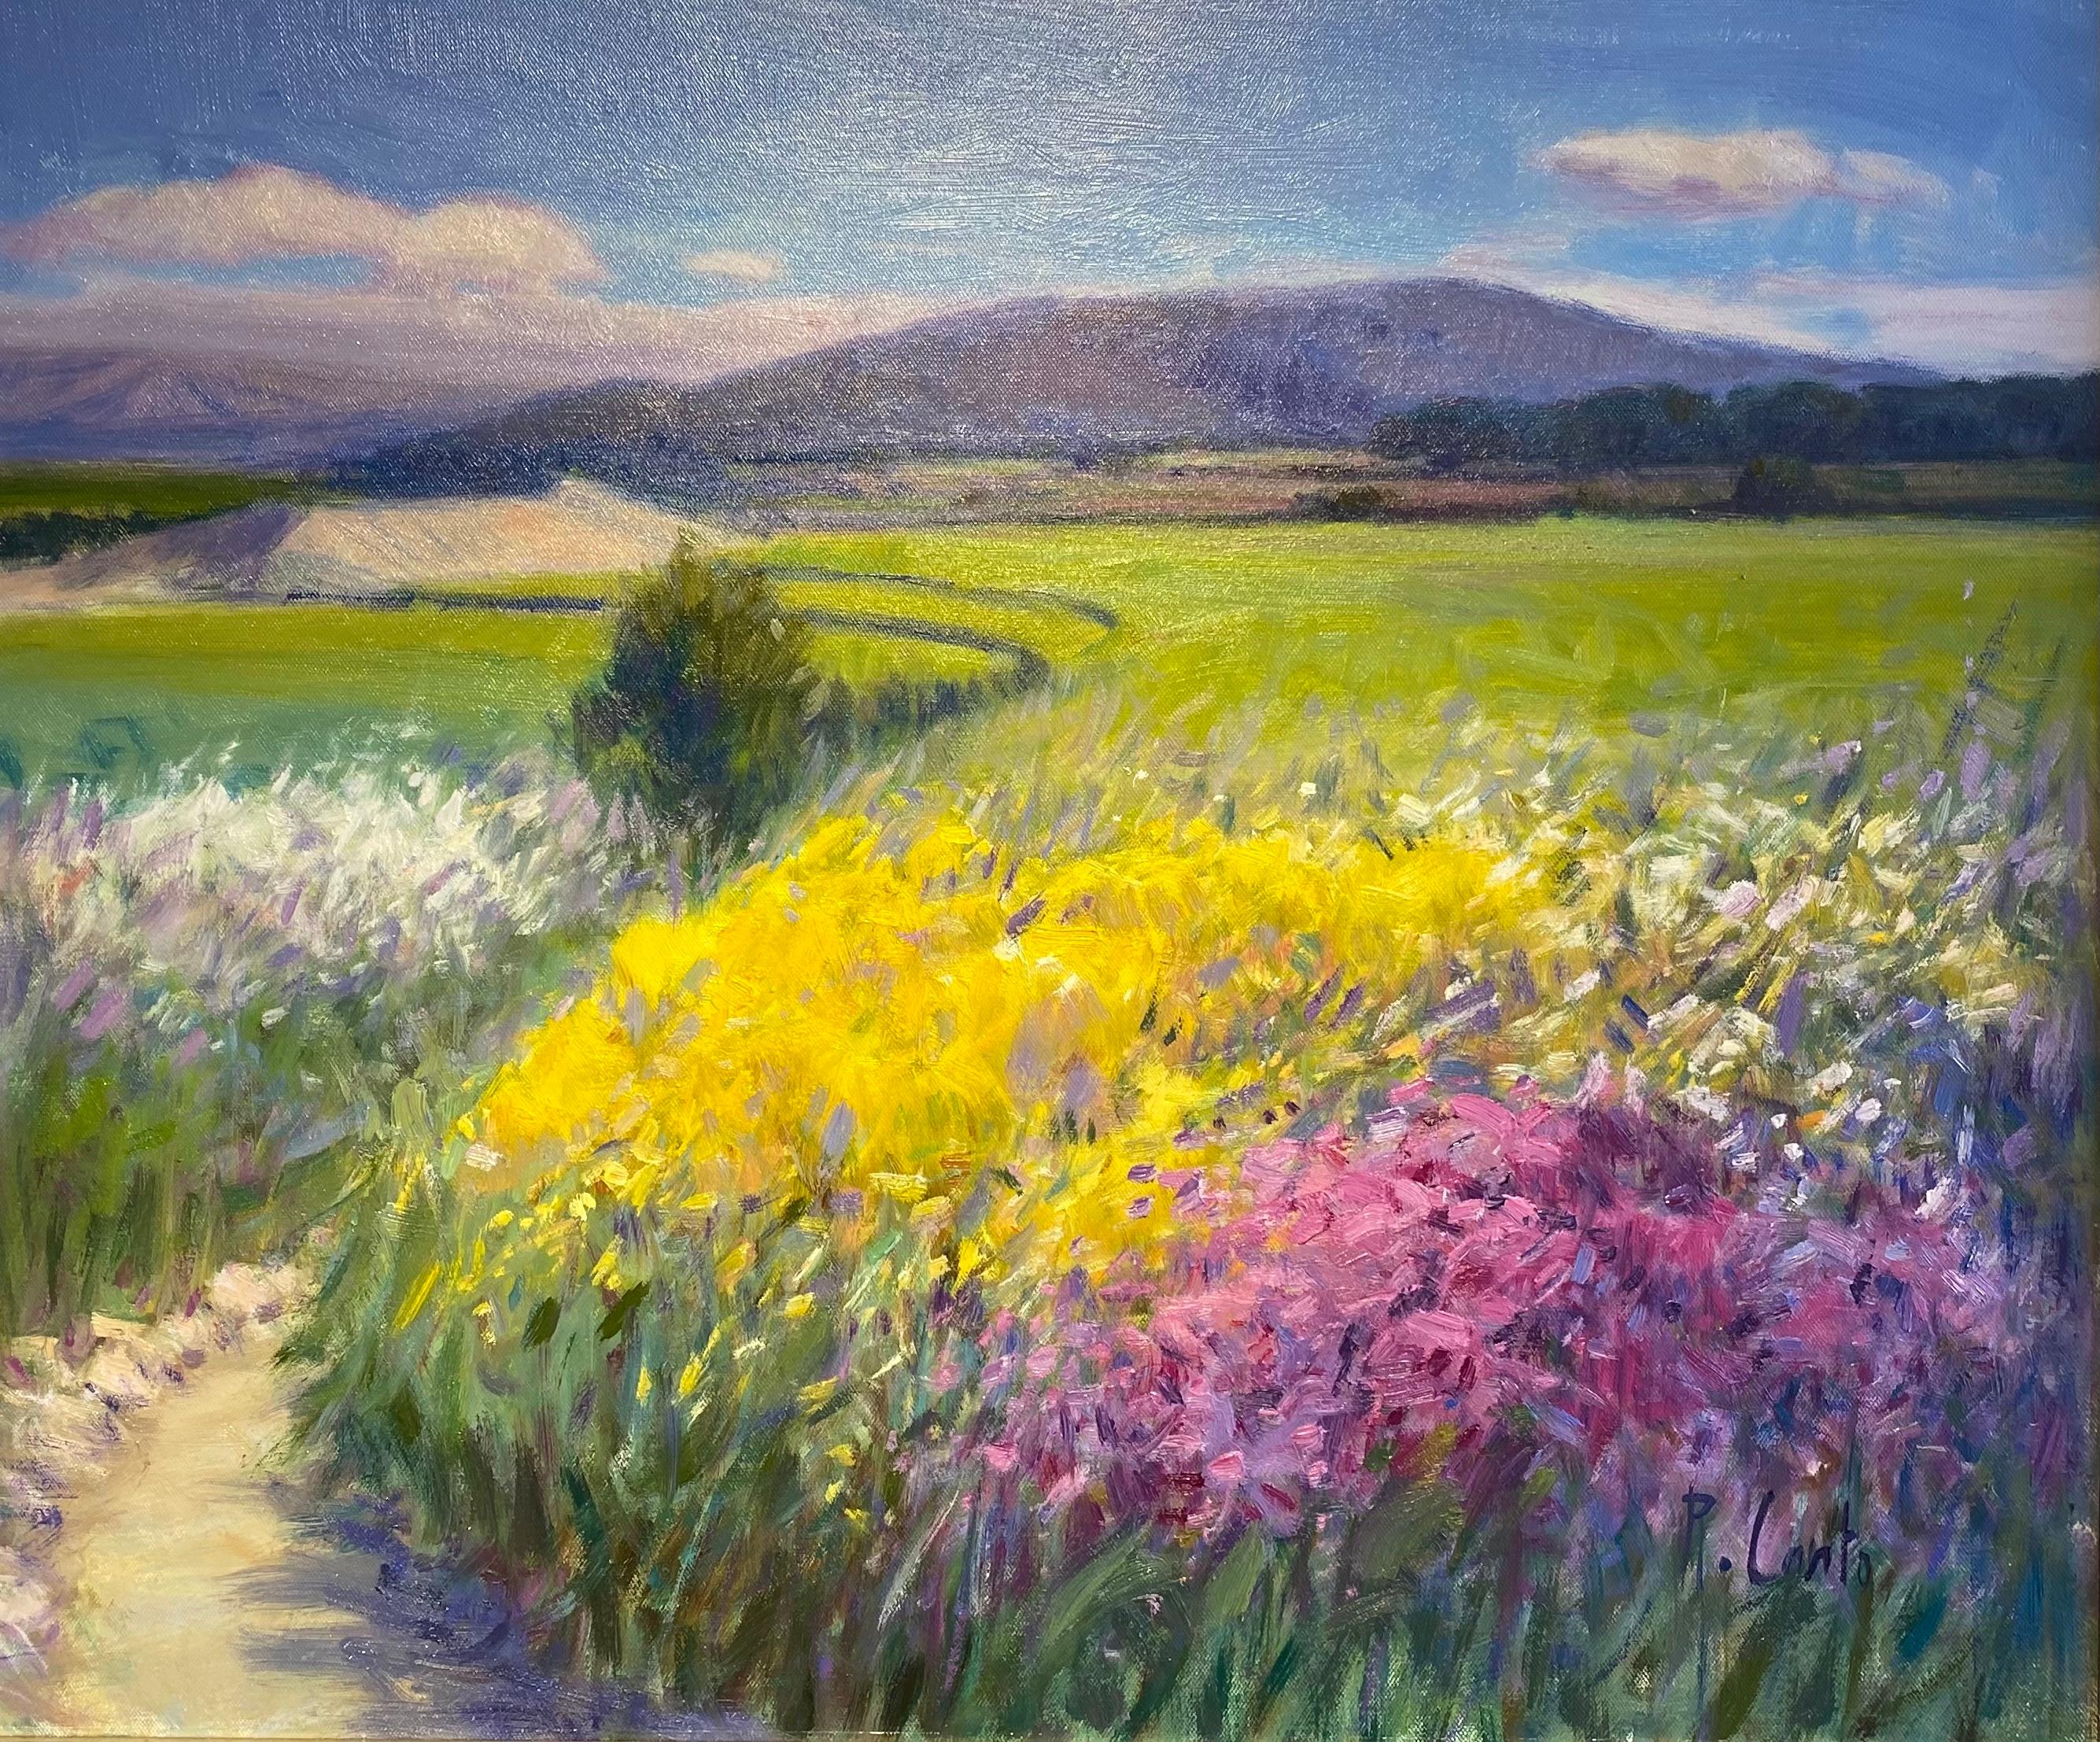 'Winding Path' Contemporary Landscape painting of flowers, mountains, fields  - Painting by Rosa Canto